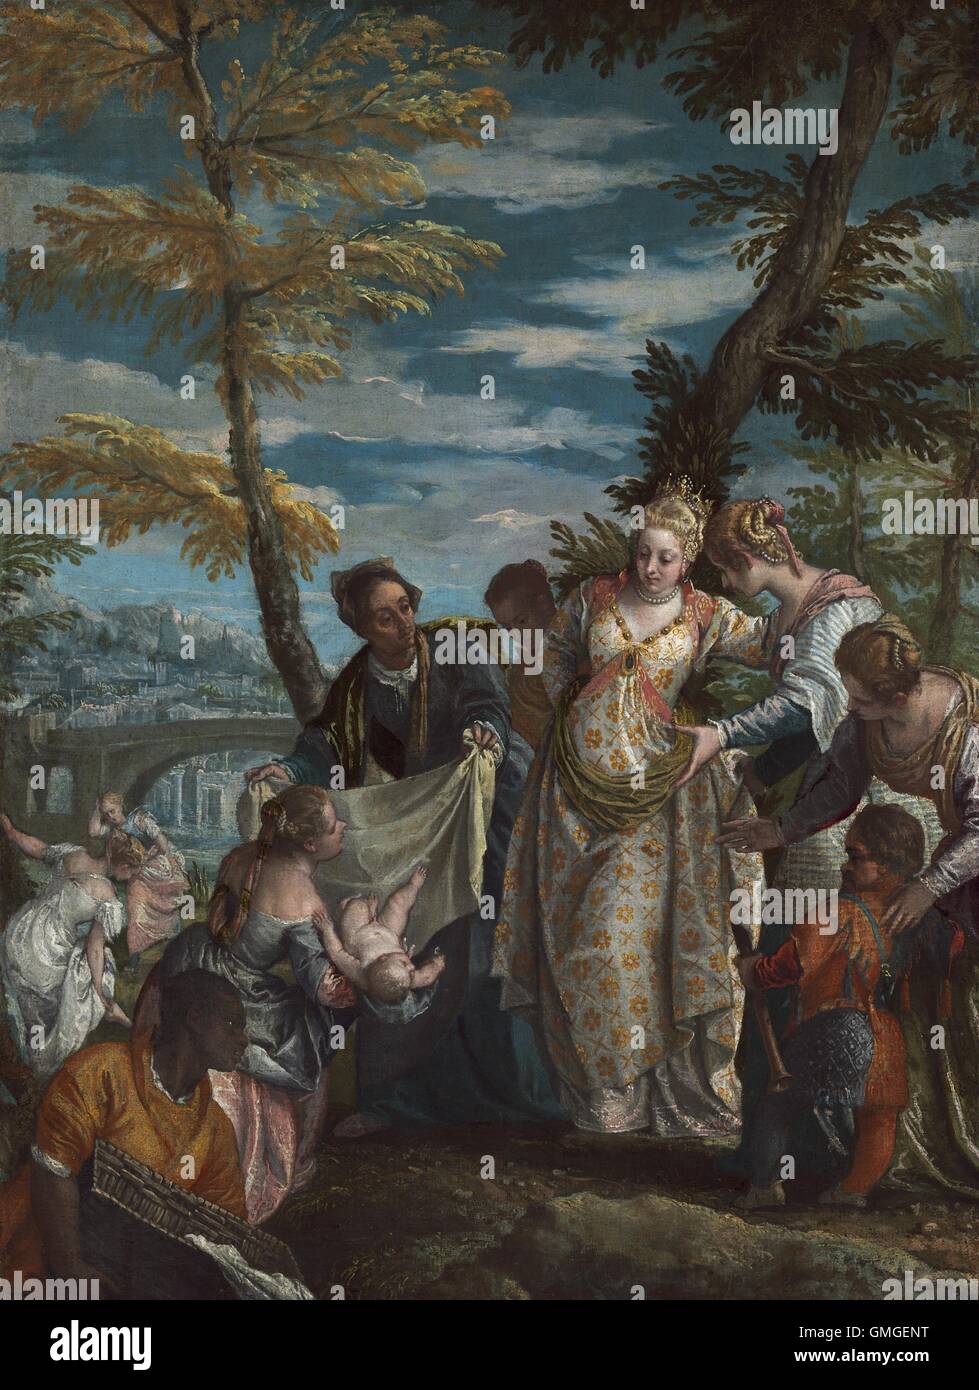 The Finding of Moses, by Veronese, 1570-75, Italian painting, oil on canvas. Pharaoh's daughter finding the baby Moses (BSLOC 2016 6 223) Stock Photo